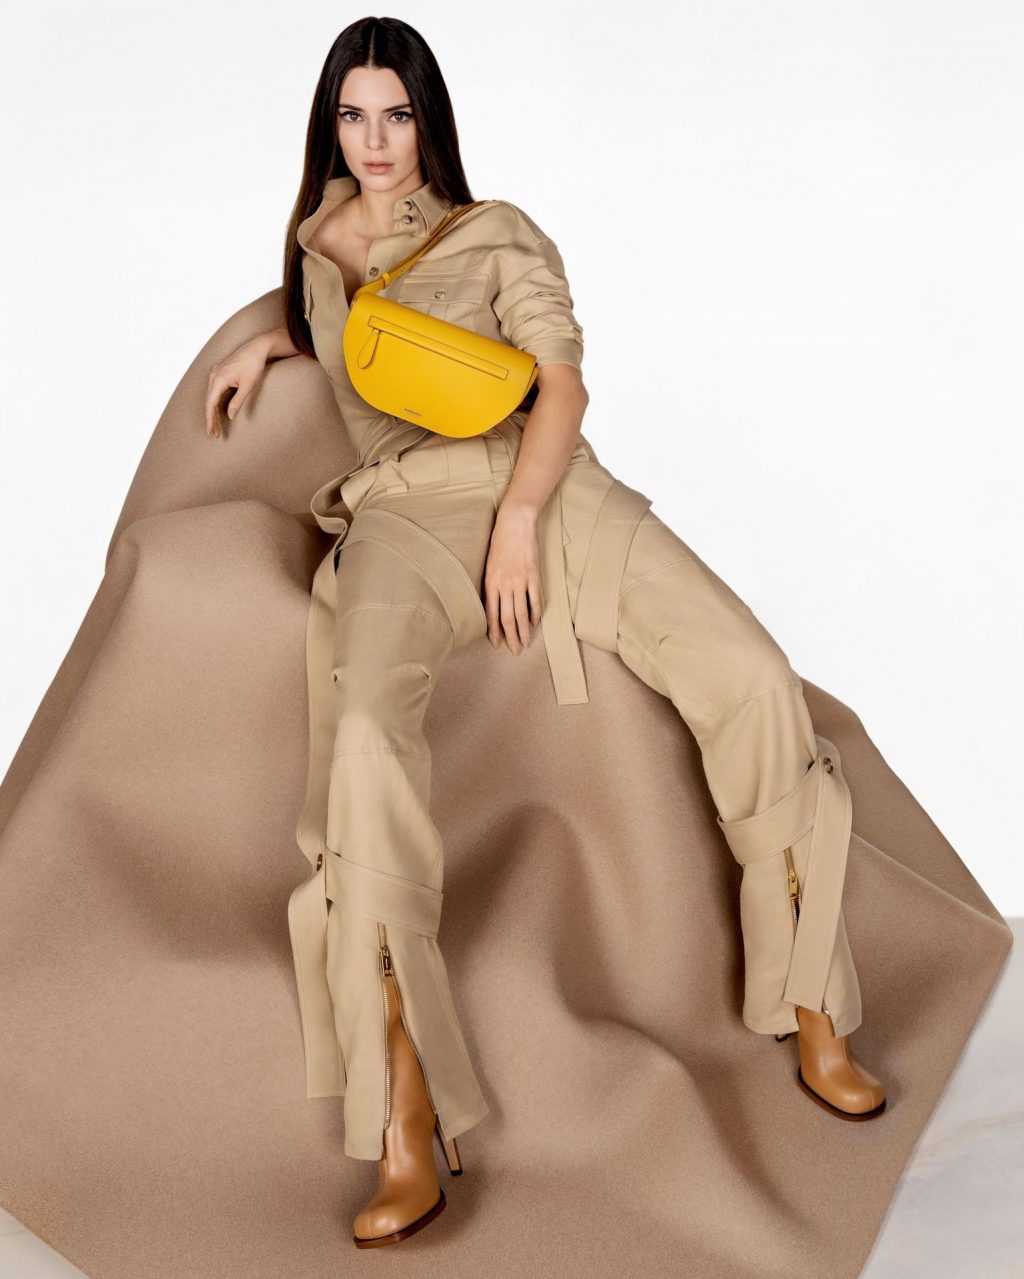 Kendall Jenner Poses for a New Burberry Campaign (8 Photos)